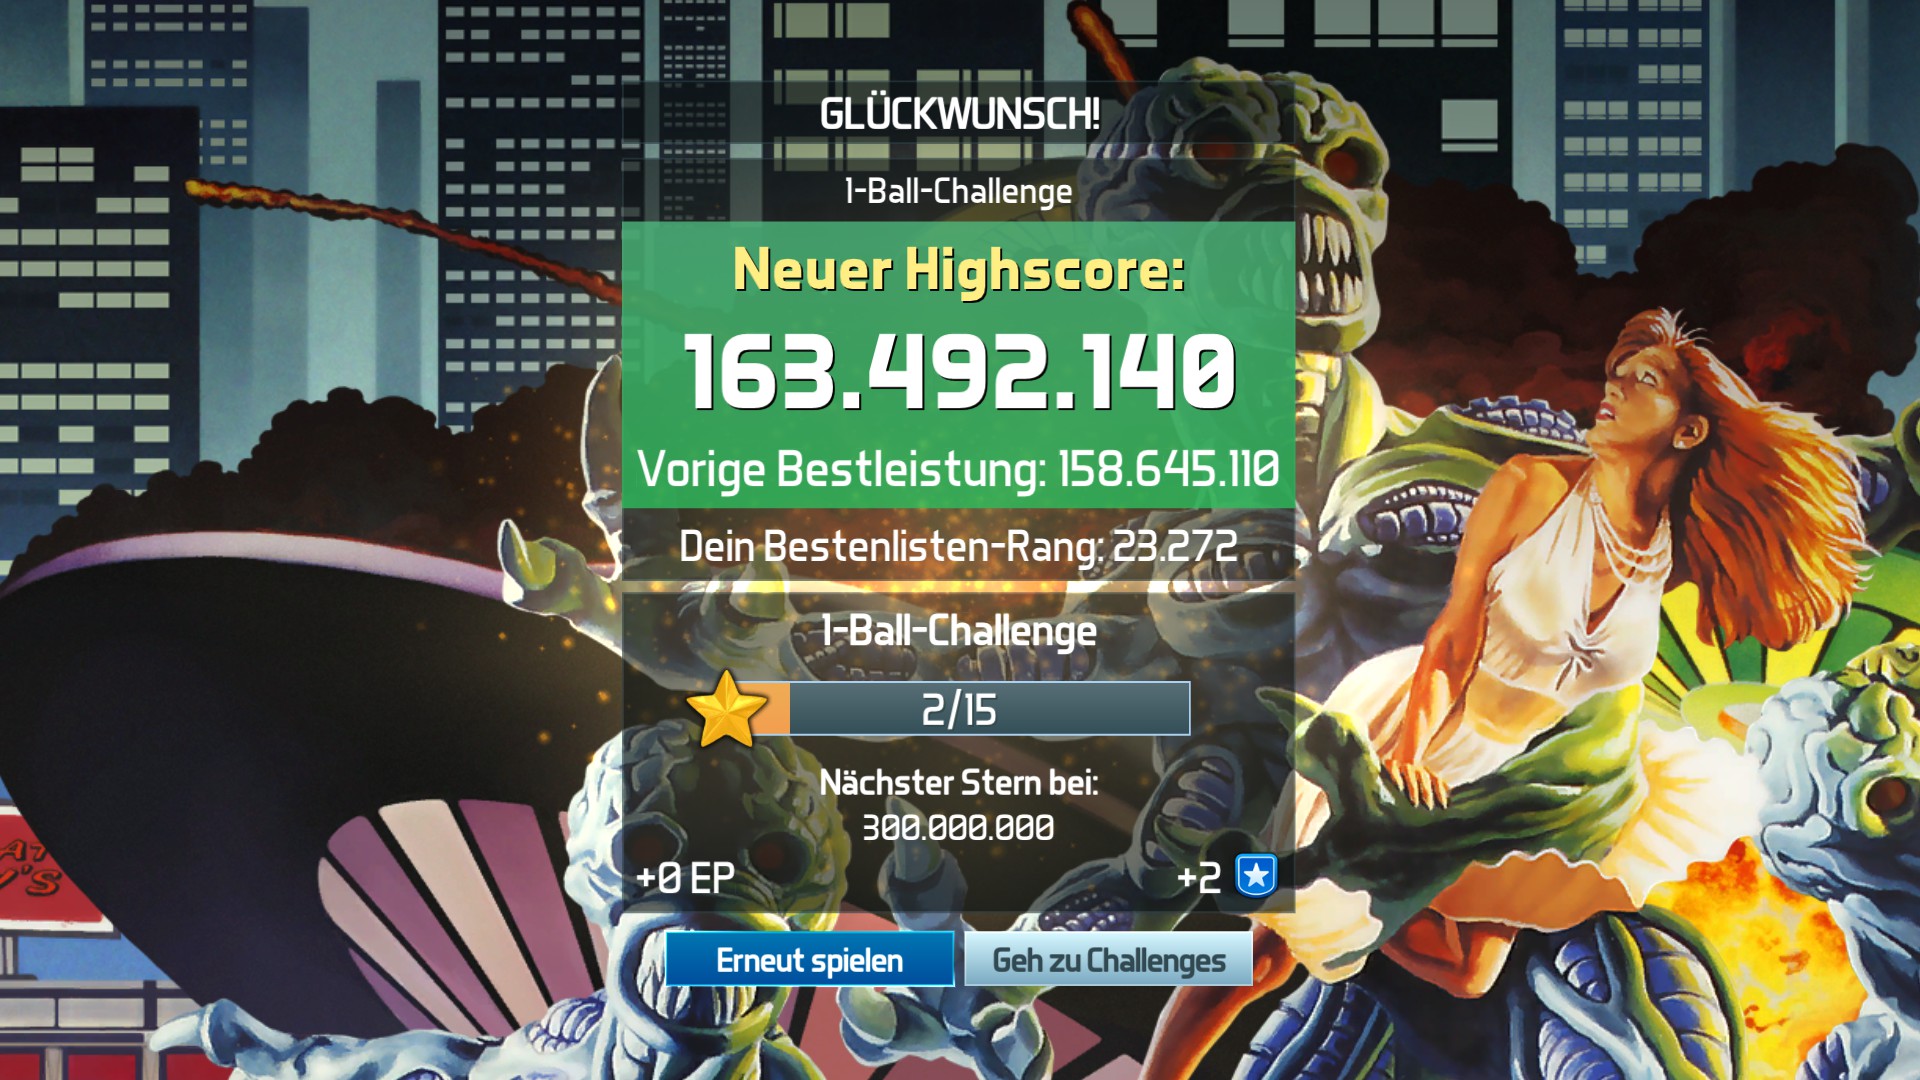 e2e4: Pinball FX3: Attack From Mars [1 Ball] (PC) 163,492,140 points on 2022-09-22 05:07:27